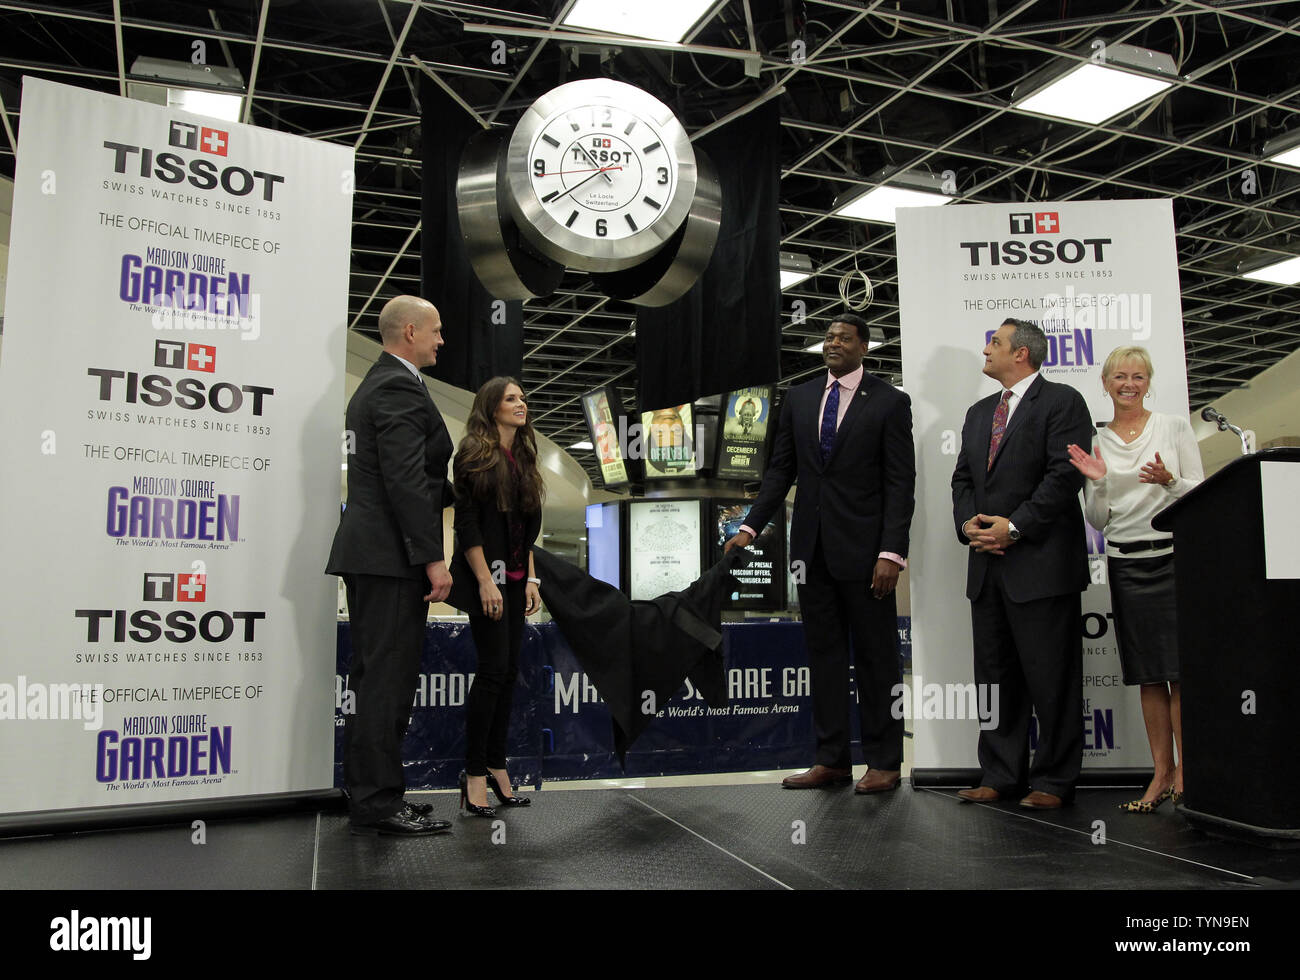 Tissot Swiss Watches The First Ever Official Timepiece Of Madison